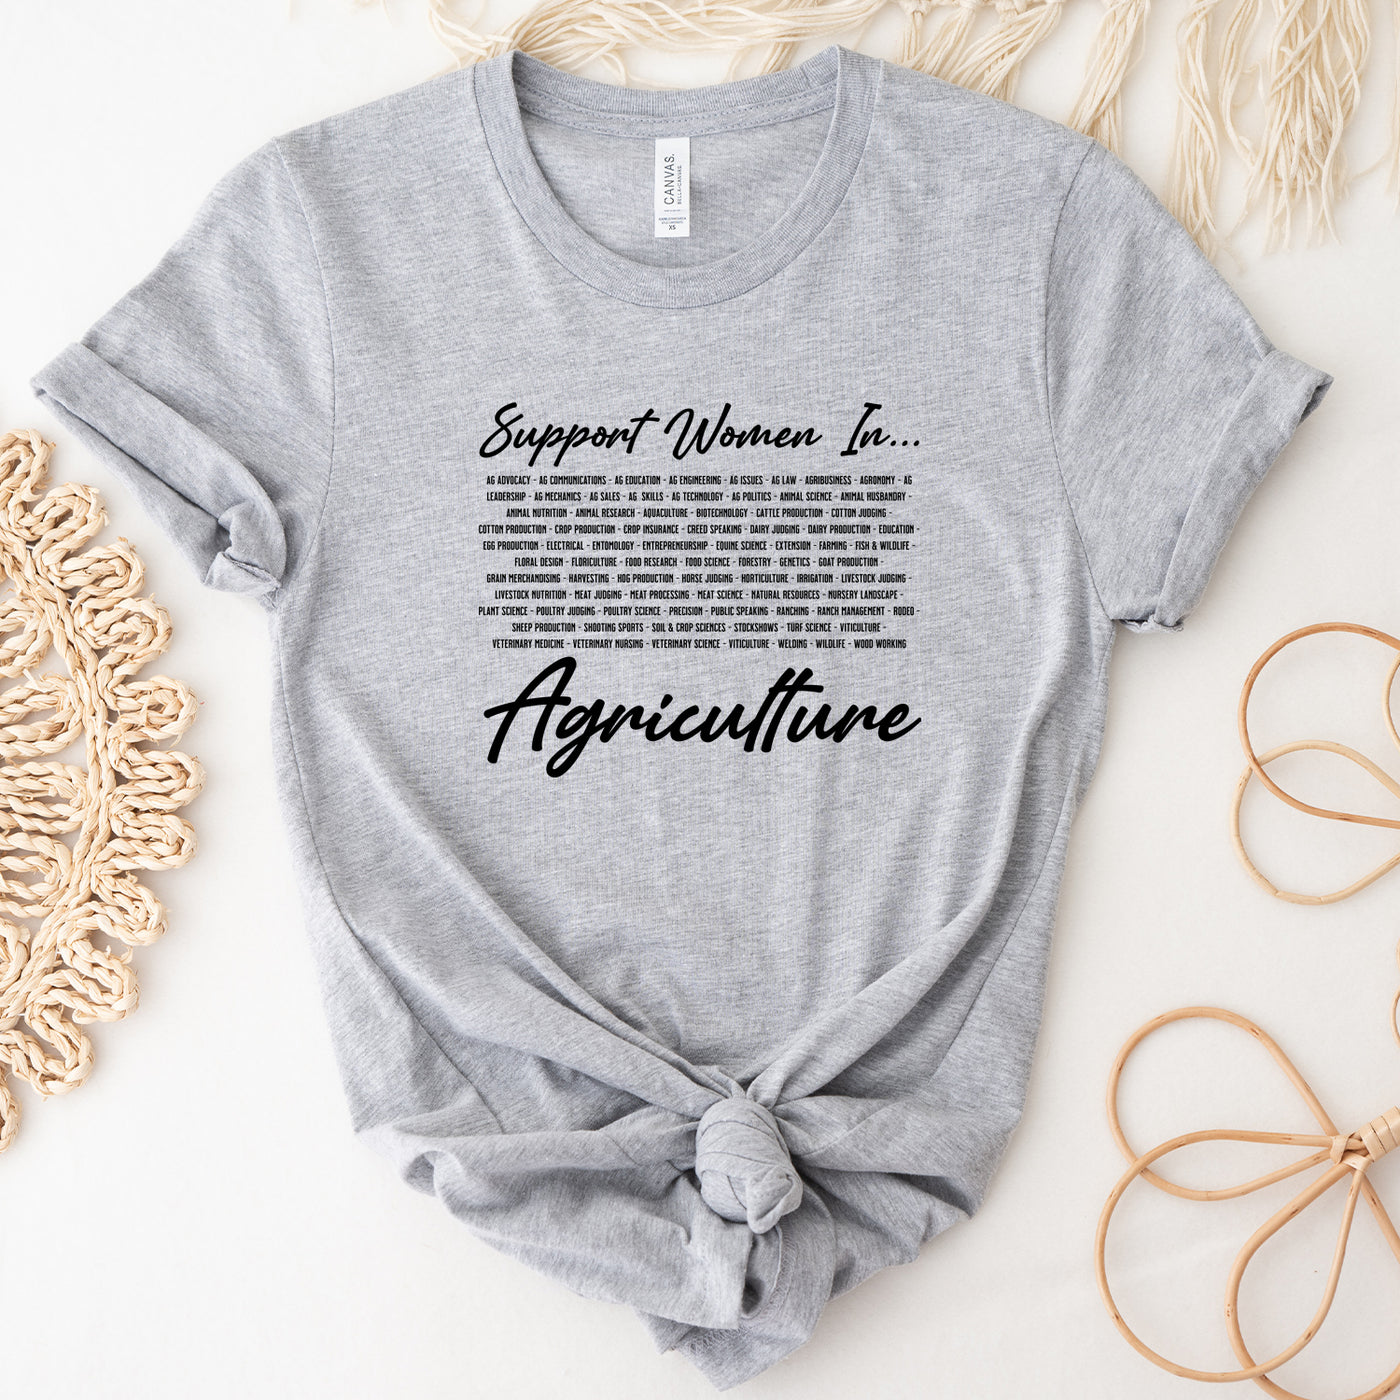 Support Women In Ag List T-Shirt (XS-4XL) - Multiple Colors!